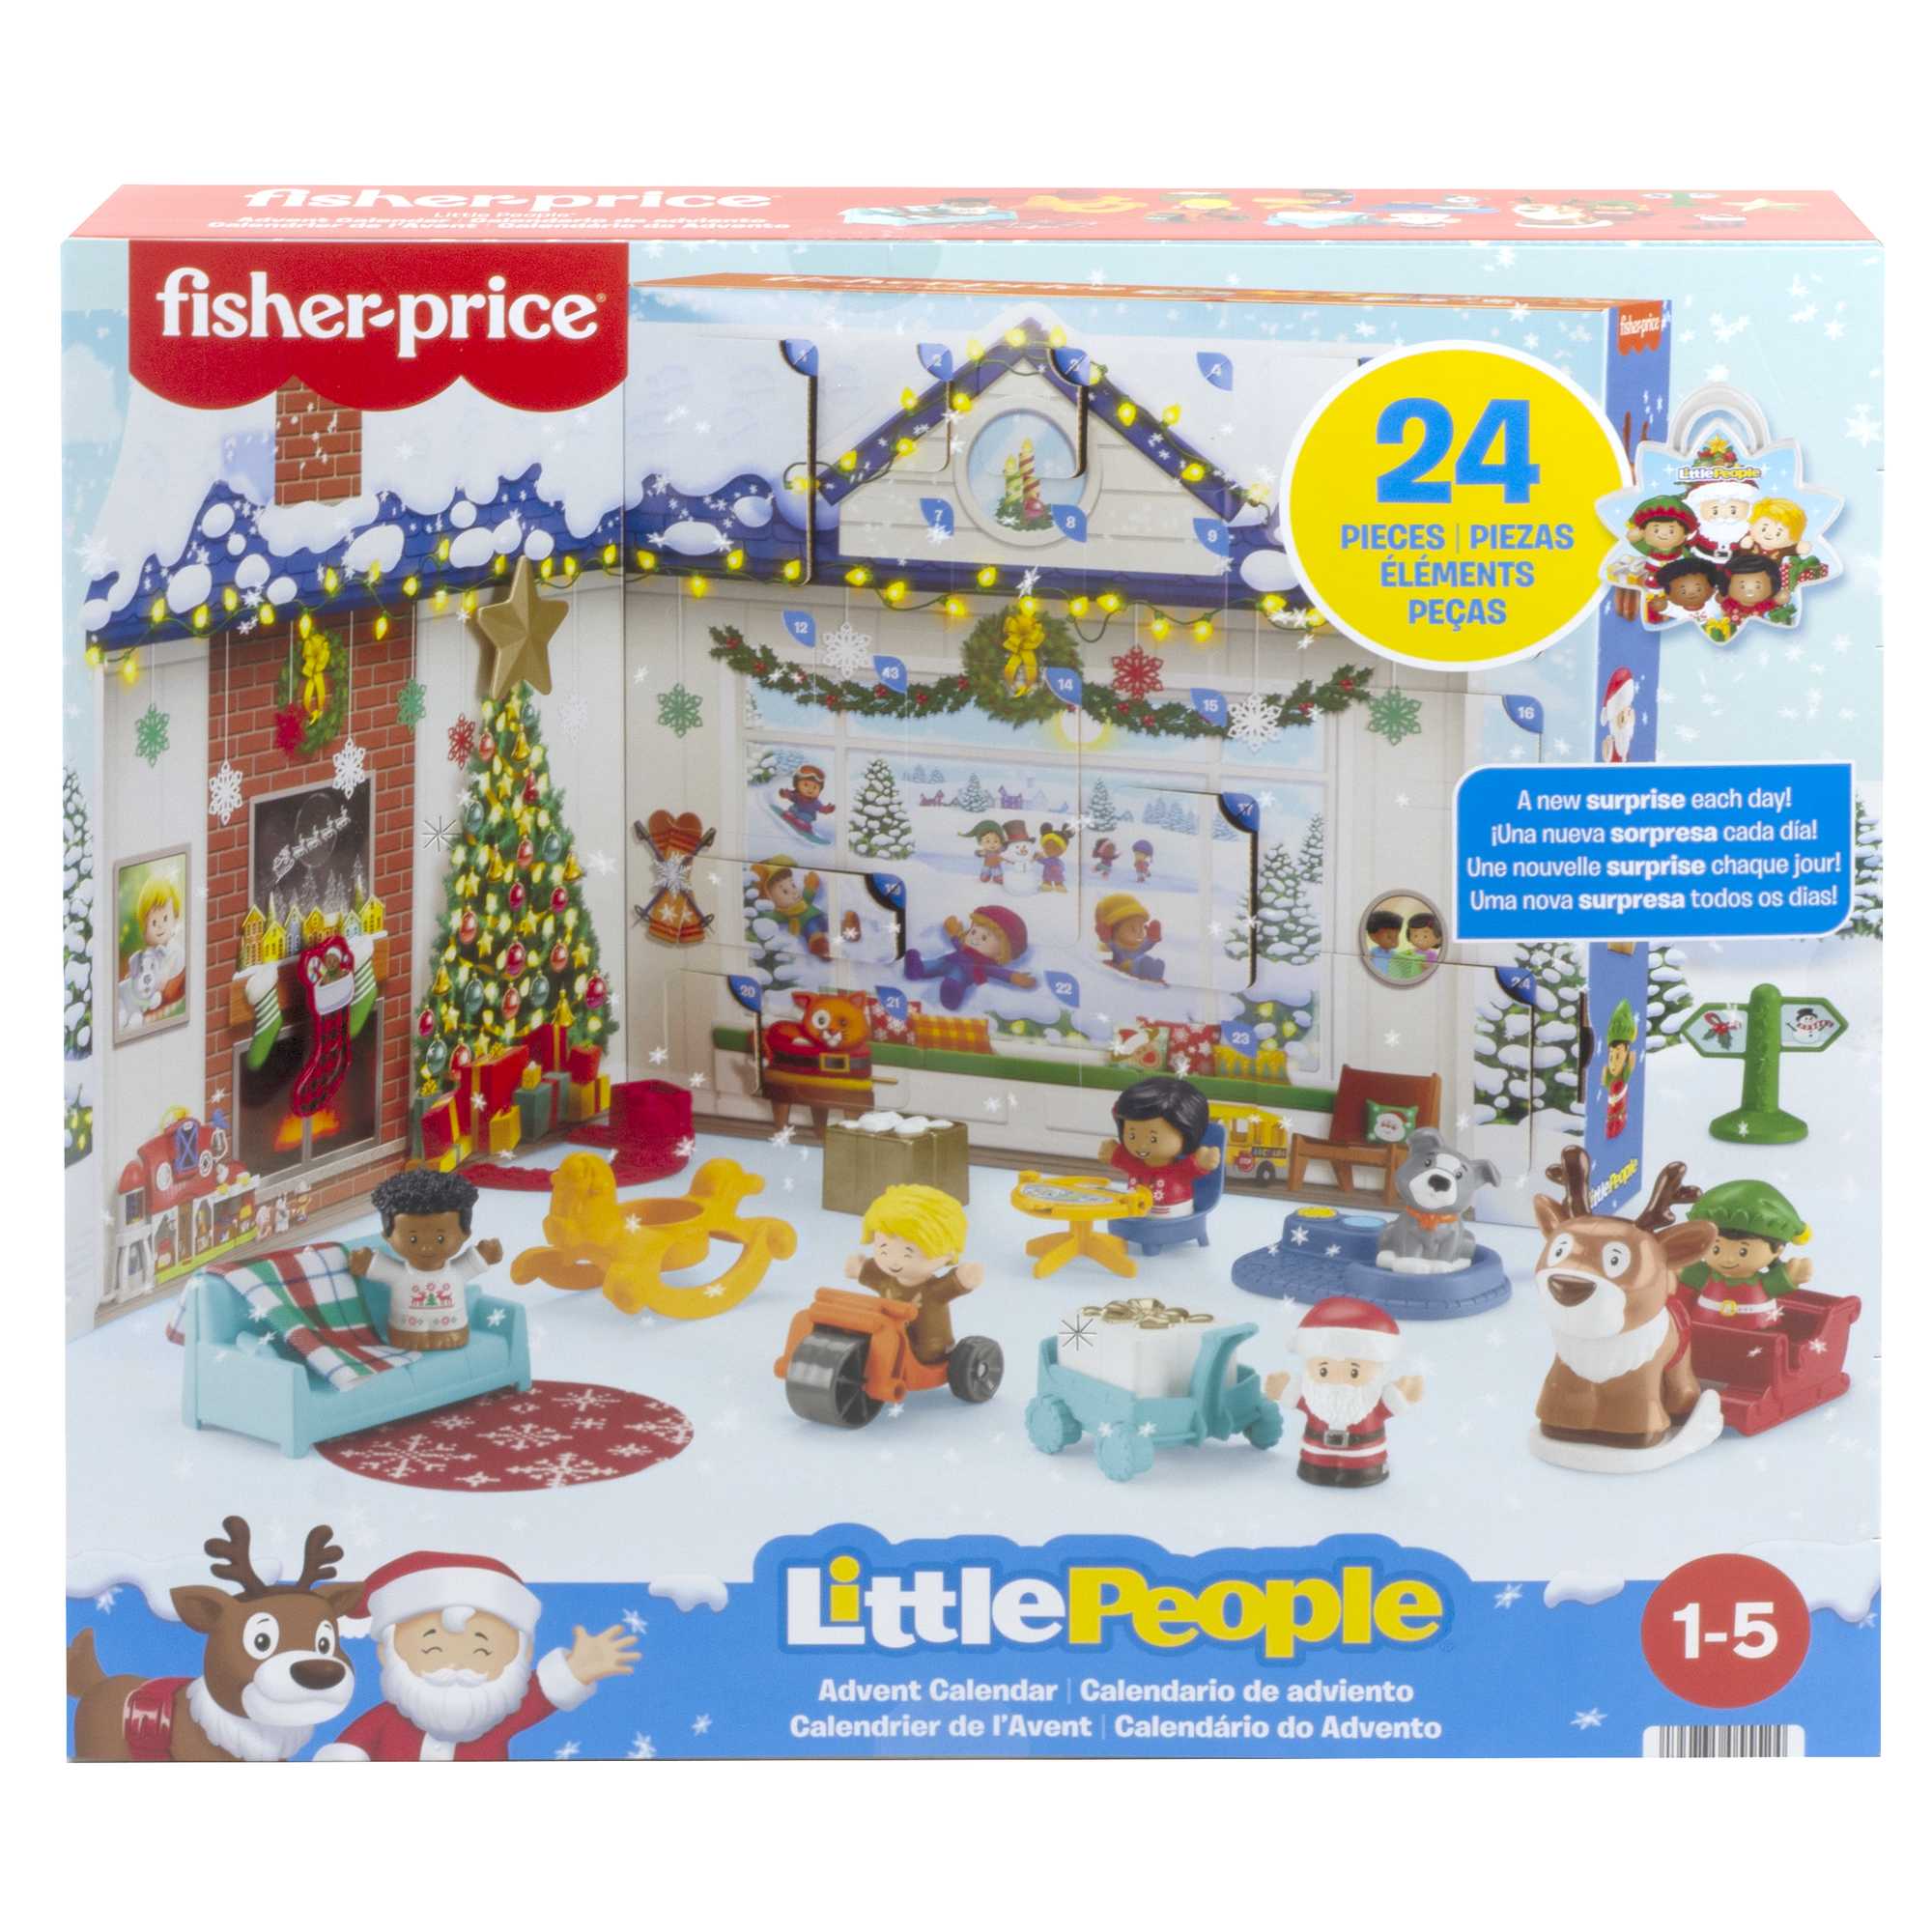  Fisher-Price Little People Toddler Toy Nativity Set with Music  Lights and 18 Pieces for Christmas Play Ages 1+ years : Toys & Games